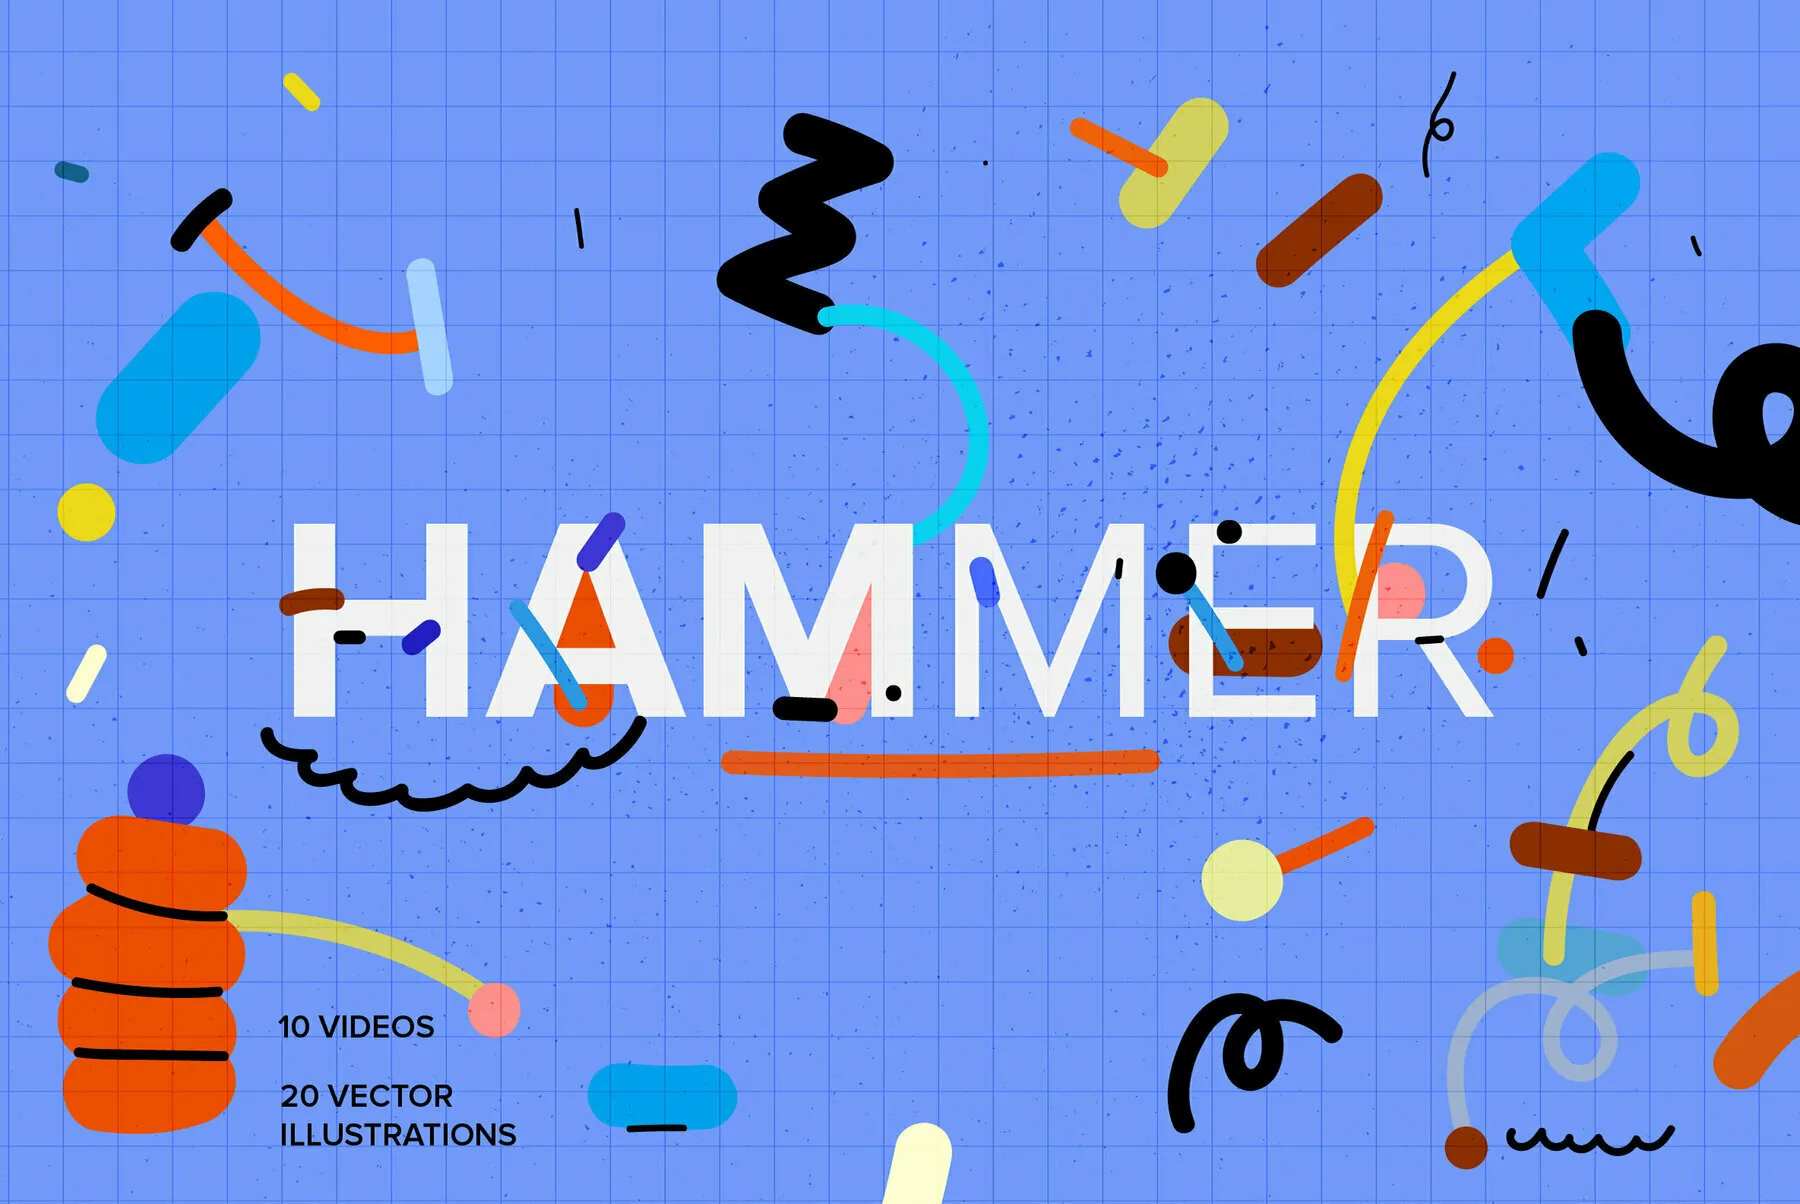 Hammer - Image & Video Collection